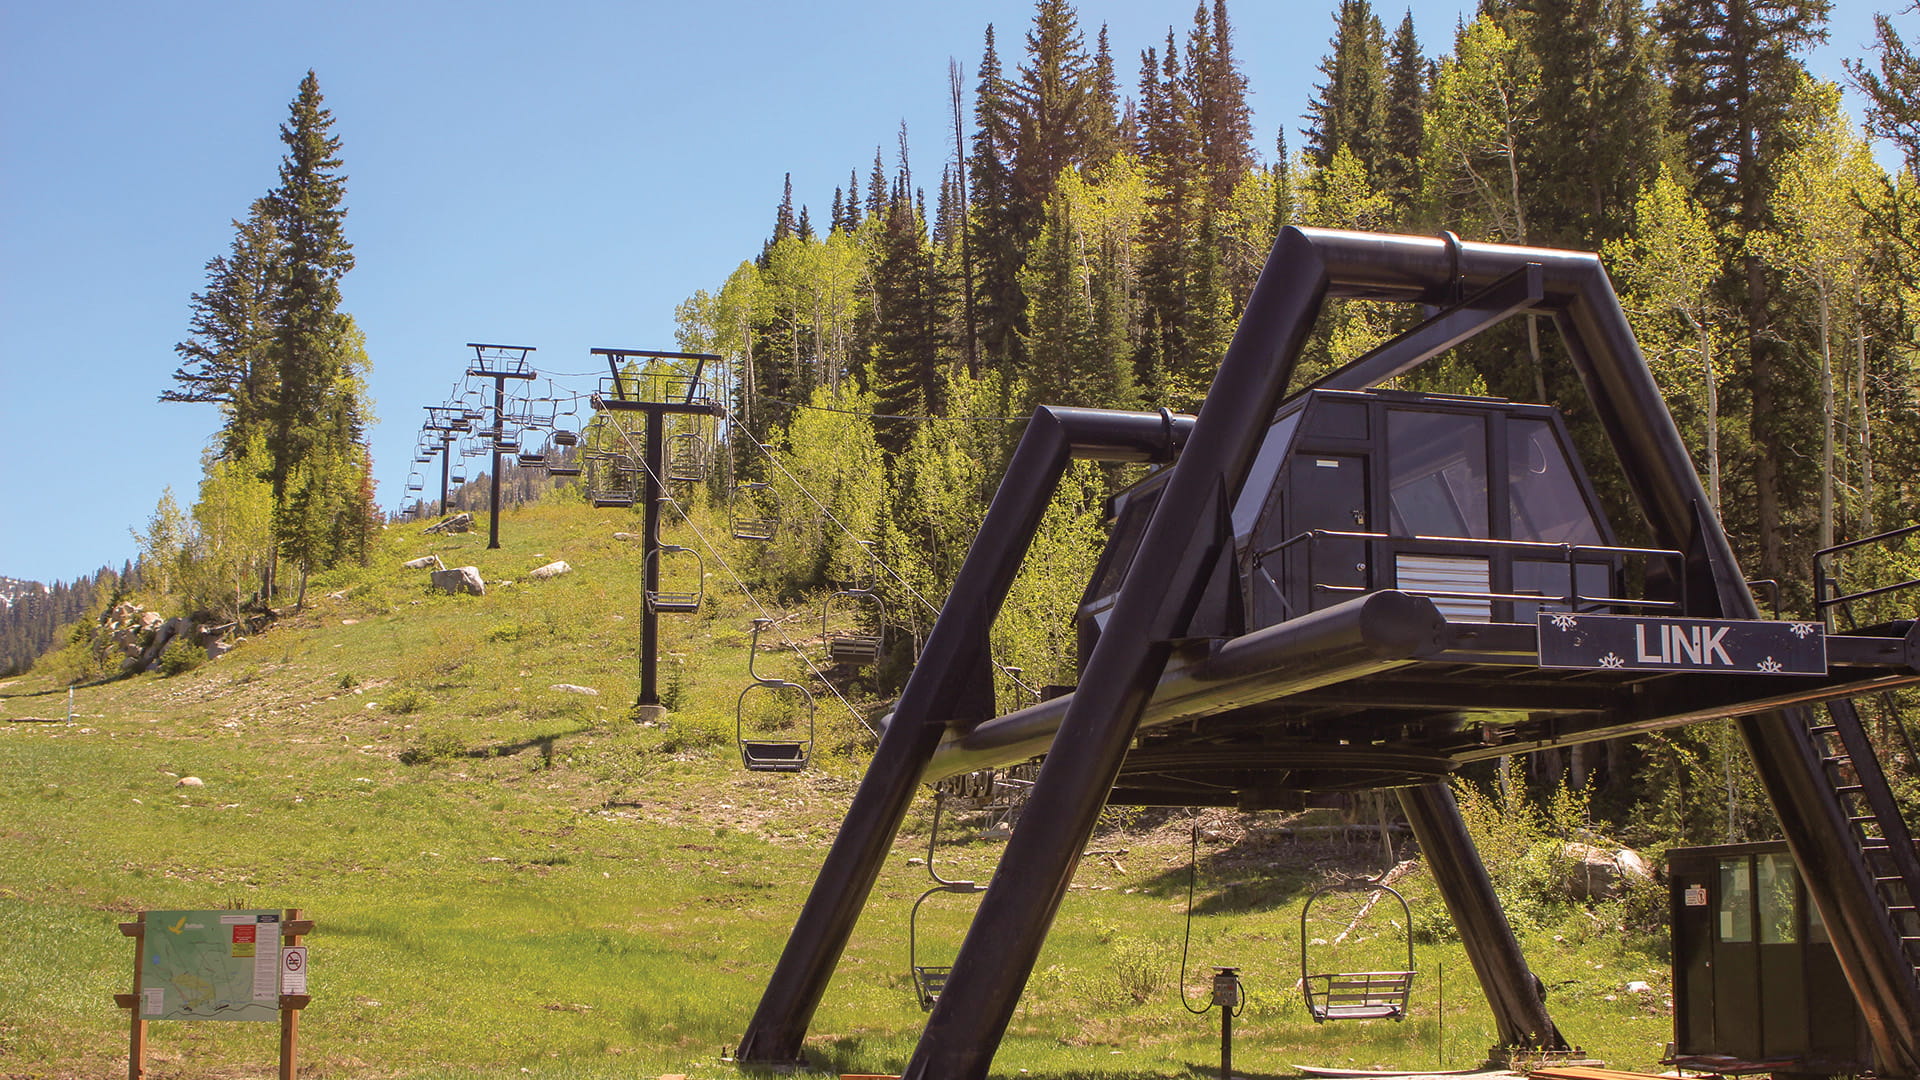 Link chairlift during summer